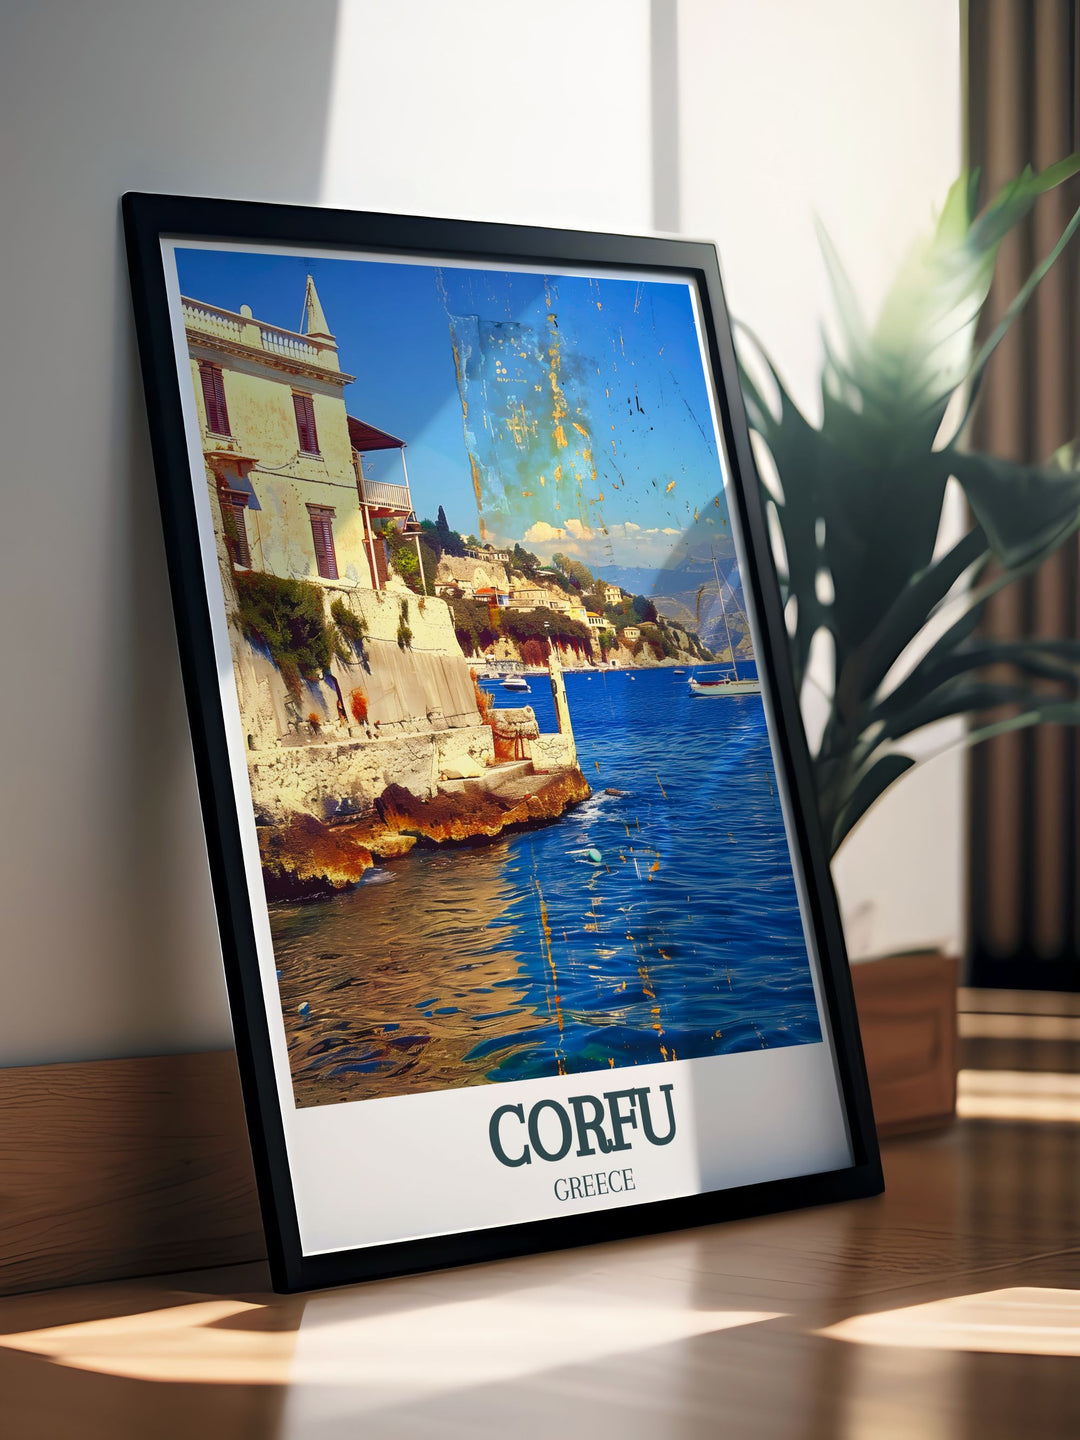 Beautiful Corfu wall art featuring the Old fortress of Corfu Ionian Sea offering a vibrant and detailed depiction perfect for enhancing your home decor or as a thoughtful Corfu travel gift for those who appreciate Greek art and the serene landscapes of Corfu Greece